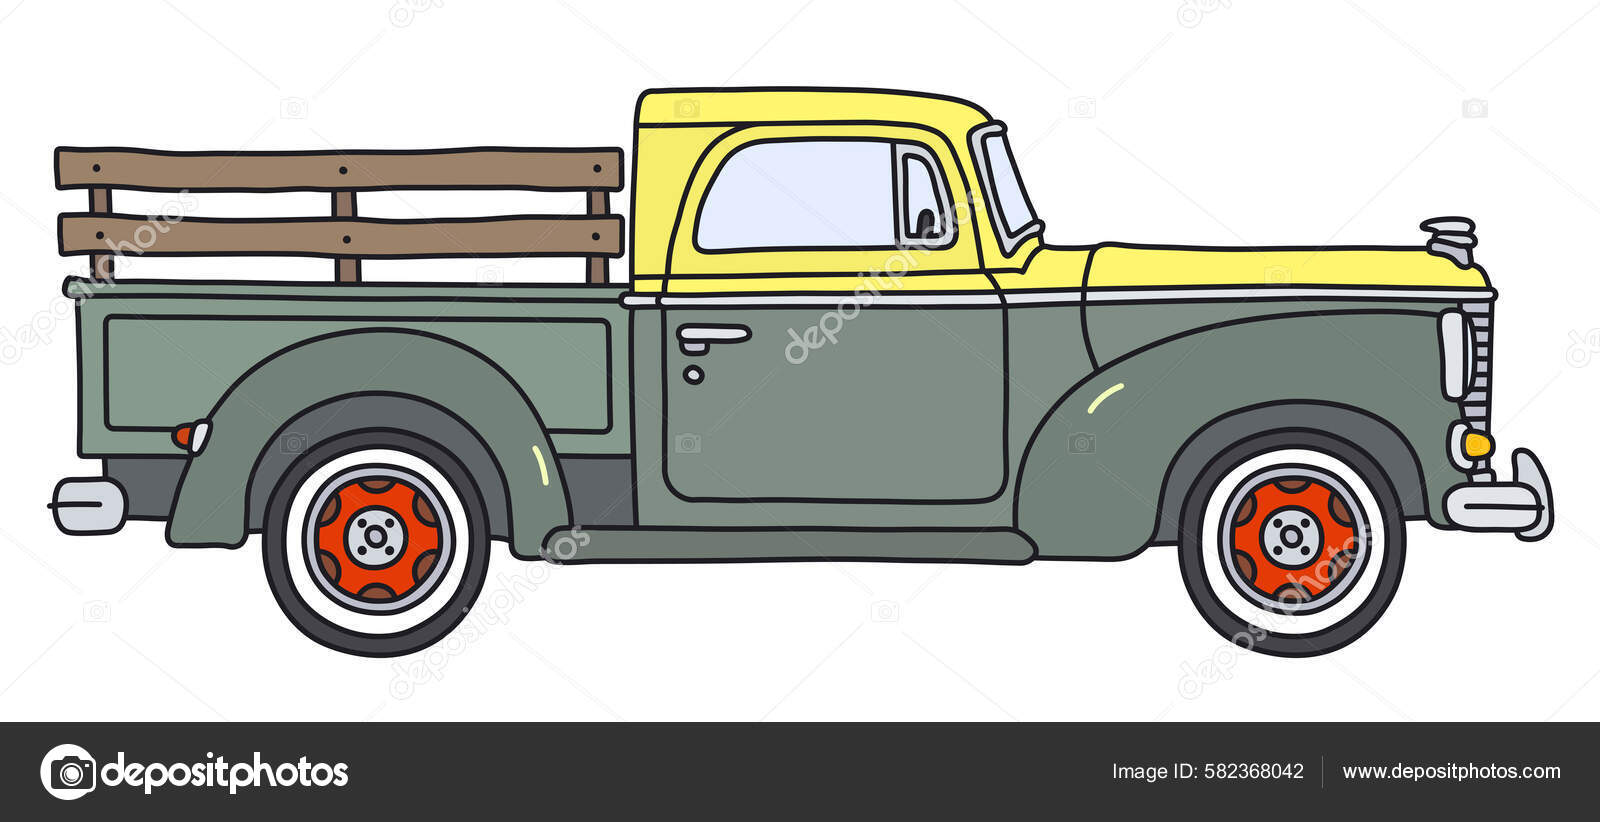 Vectorized Hand Drawing Old Green Yellow Small Semitruck Stock